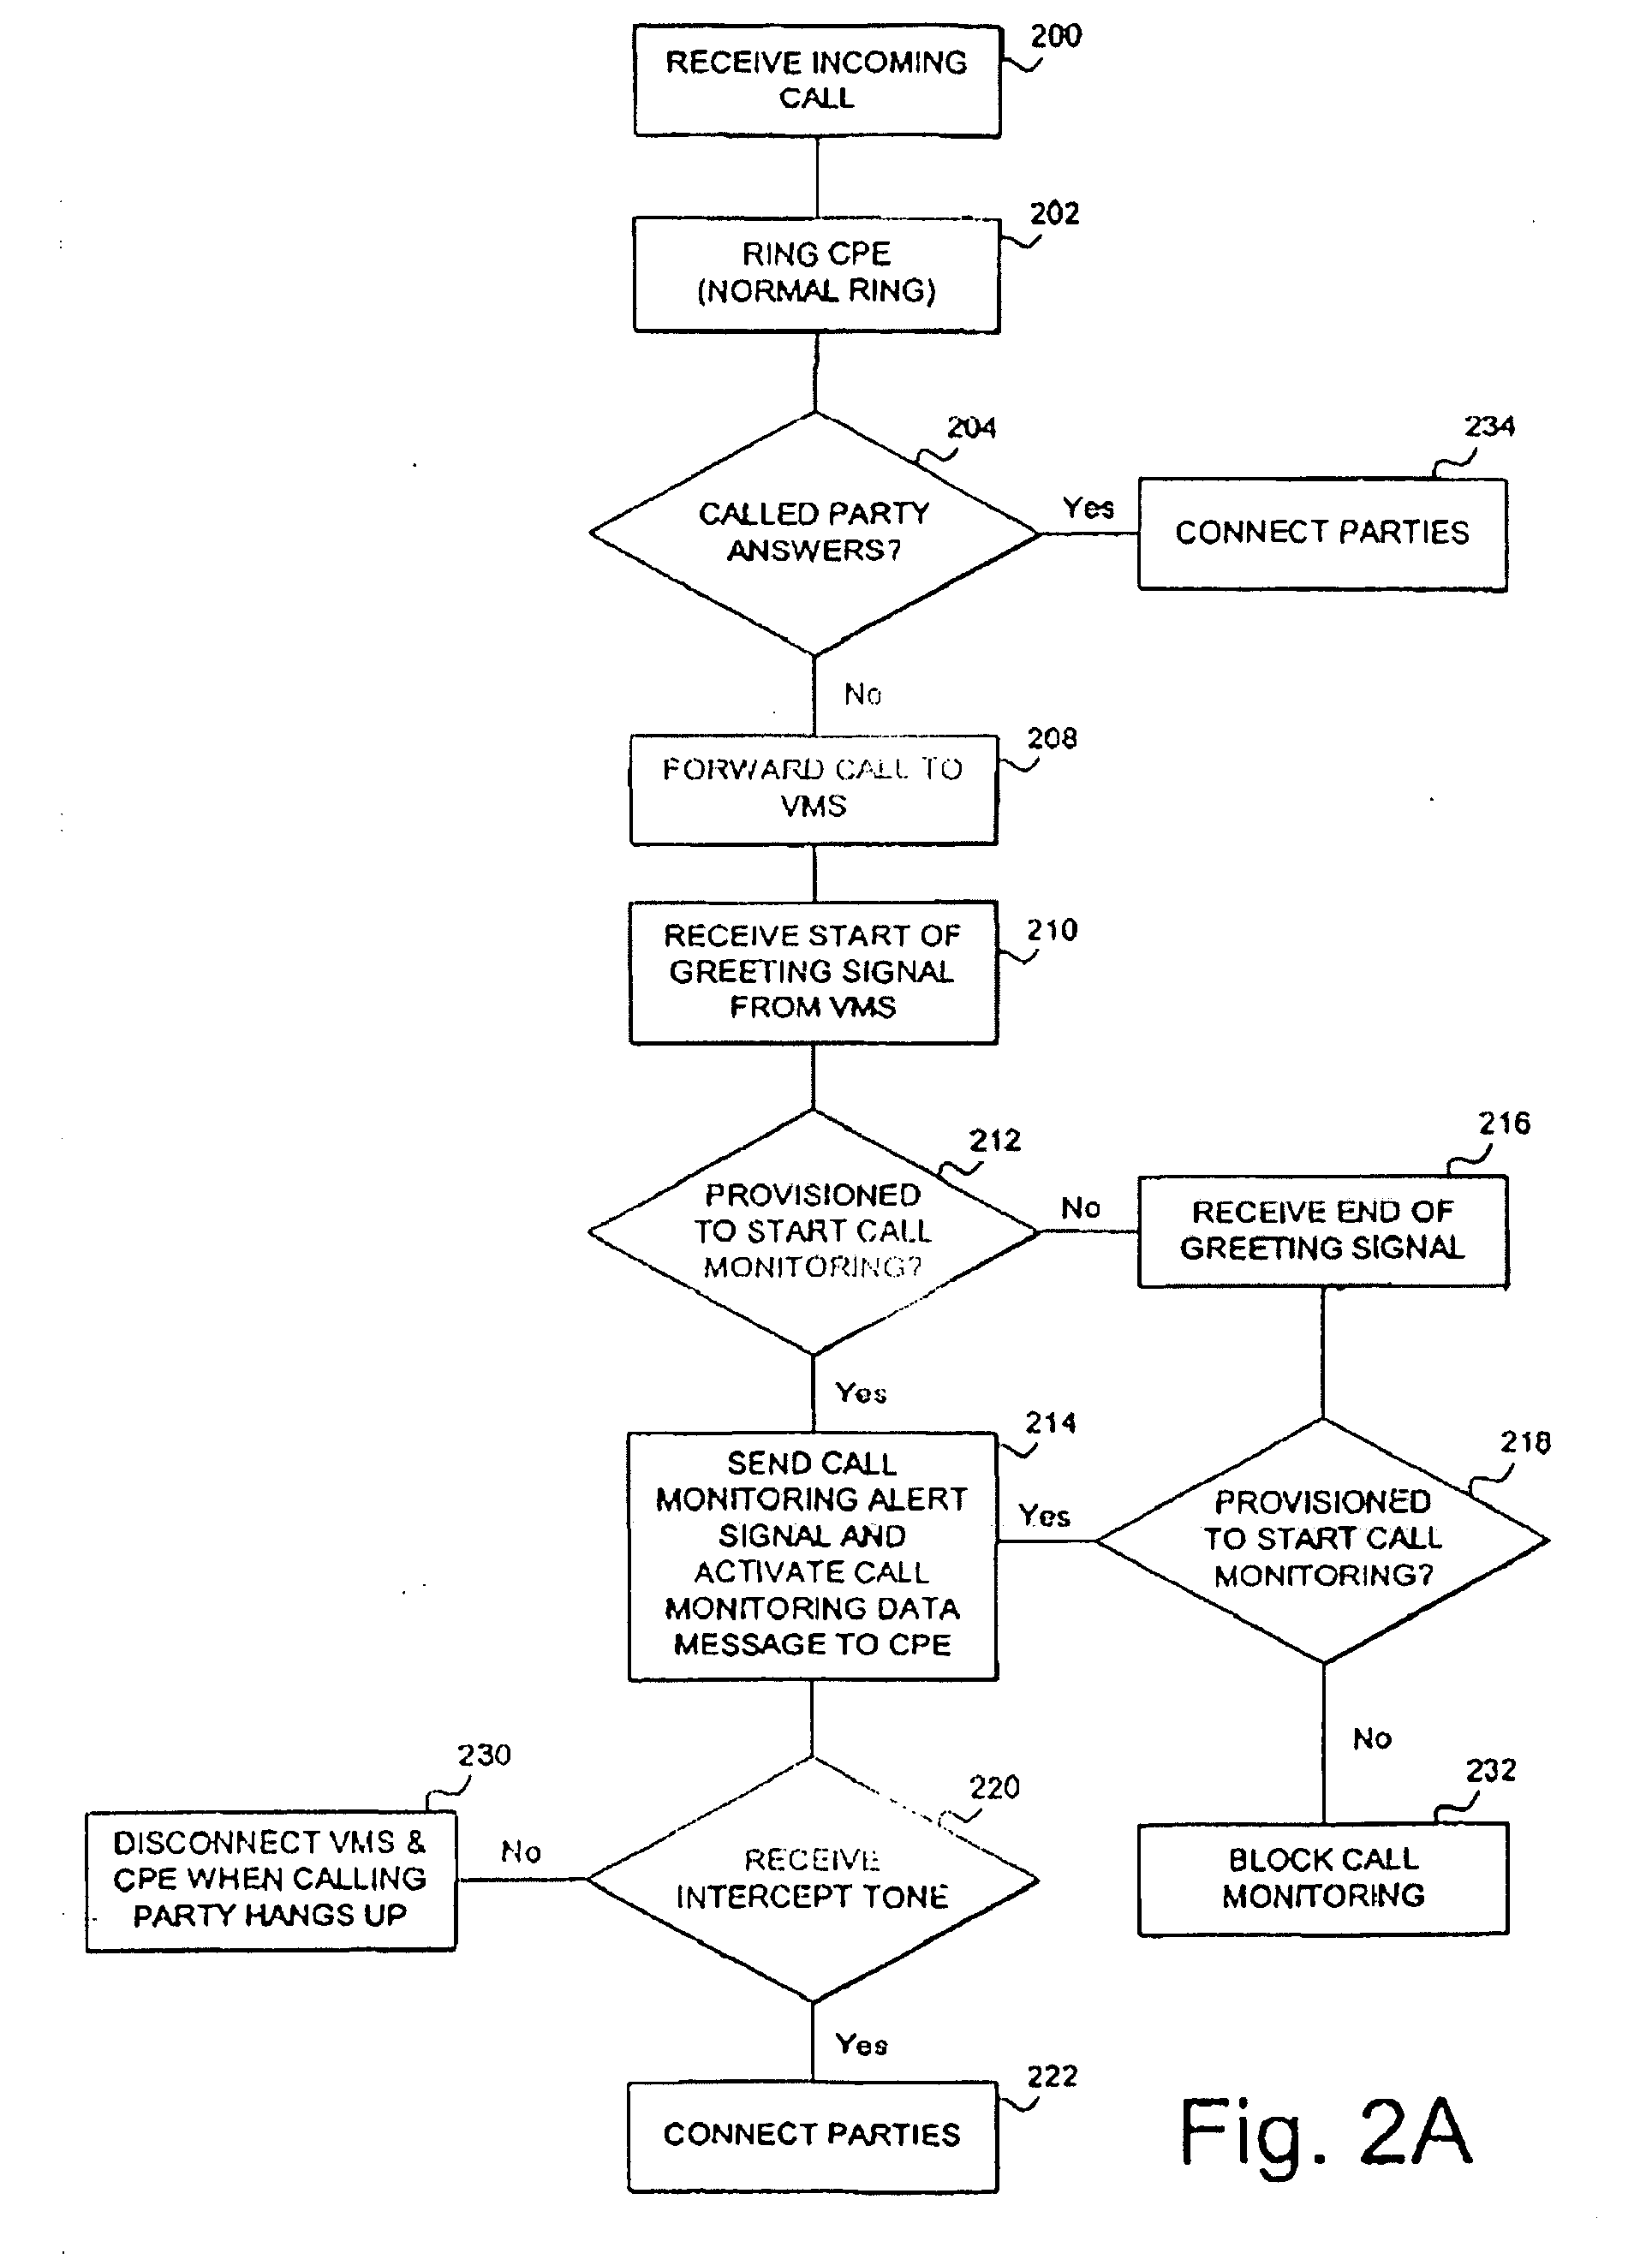 Apparatus, System and Method for Monitoring a Call Forwarded to a Network-Based Voice Mail System